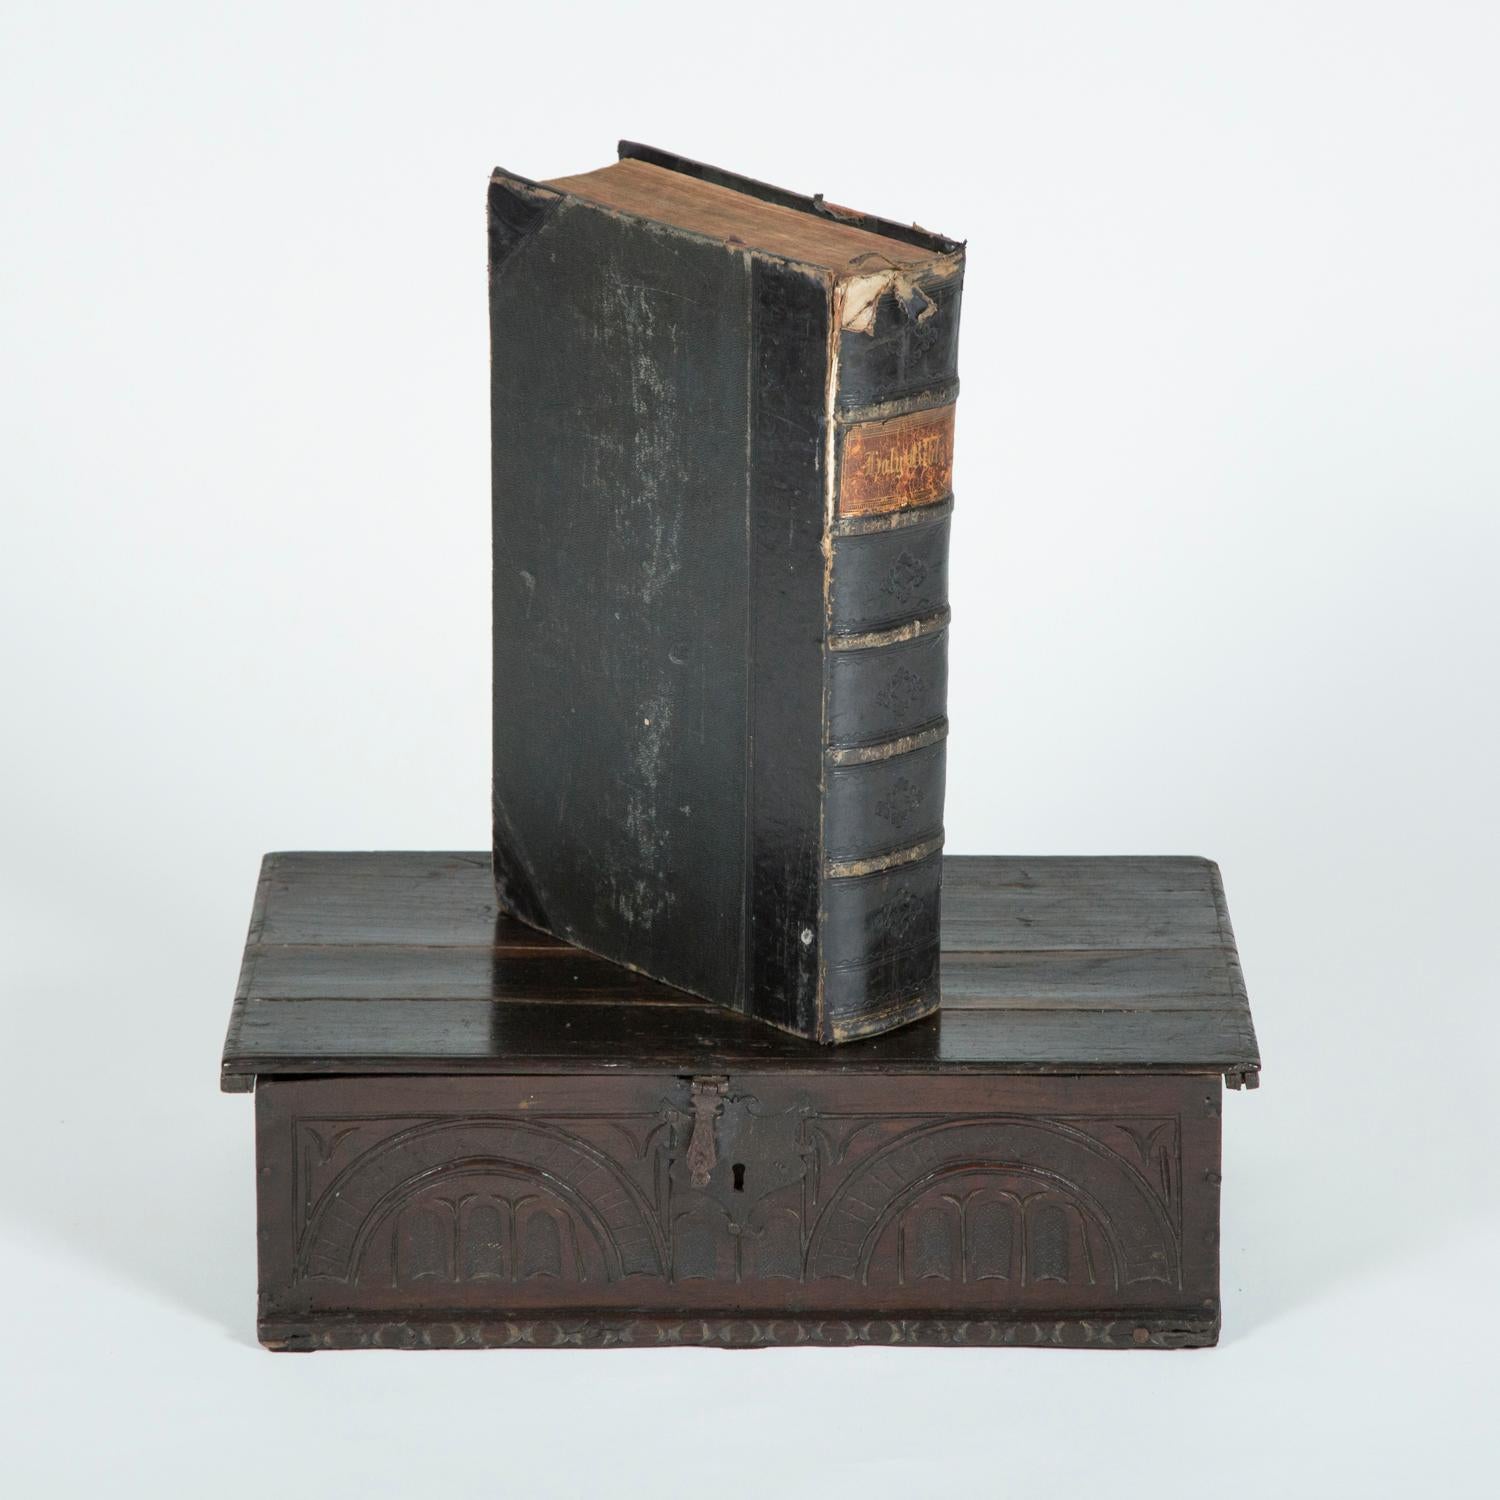 An oak bible box, with a carved arcaded front, with iron clasp and hinges. Containing a family bible. 

The Holy Bible printed by M. Brown of Newcastle upon Tyne, dated MDCCXCI (1791). 

The interior of the bible has handwritten family history,